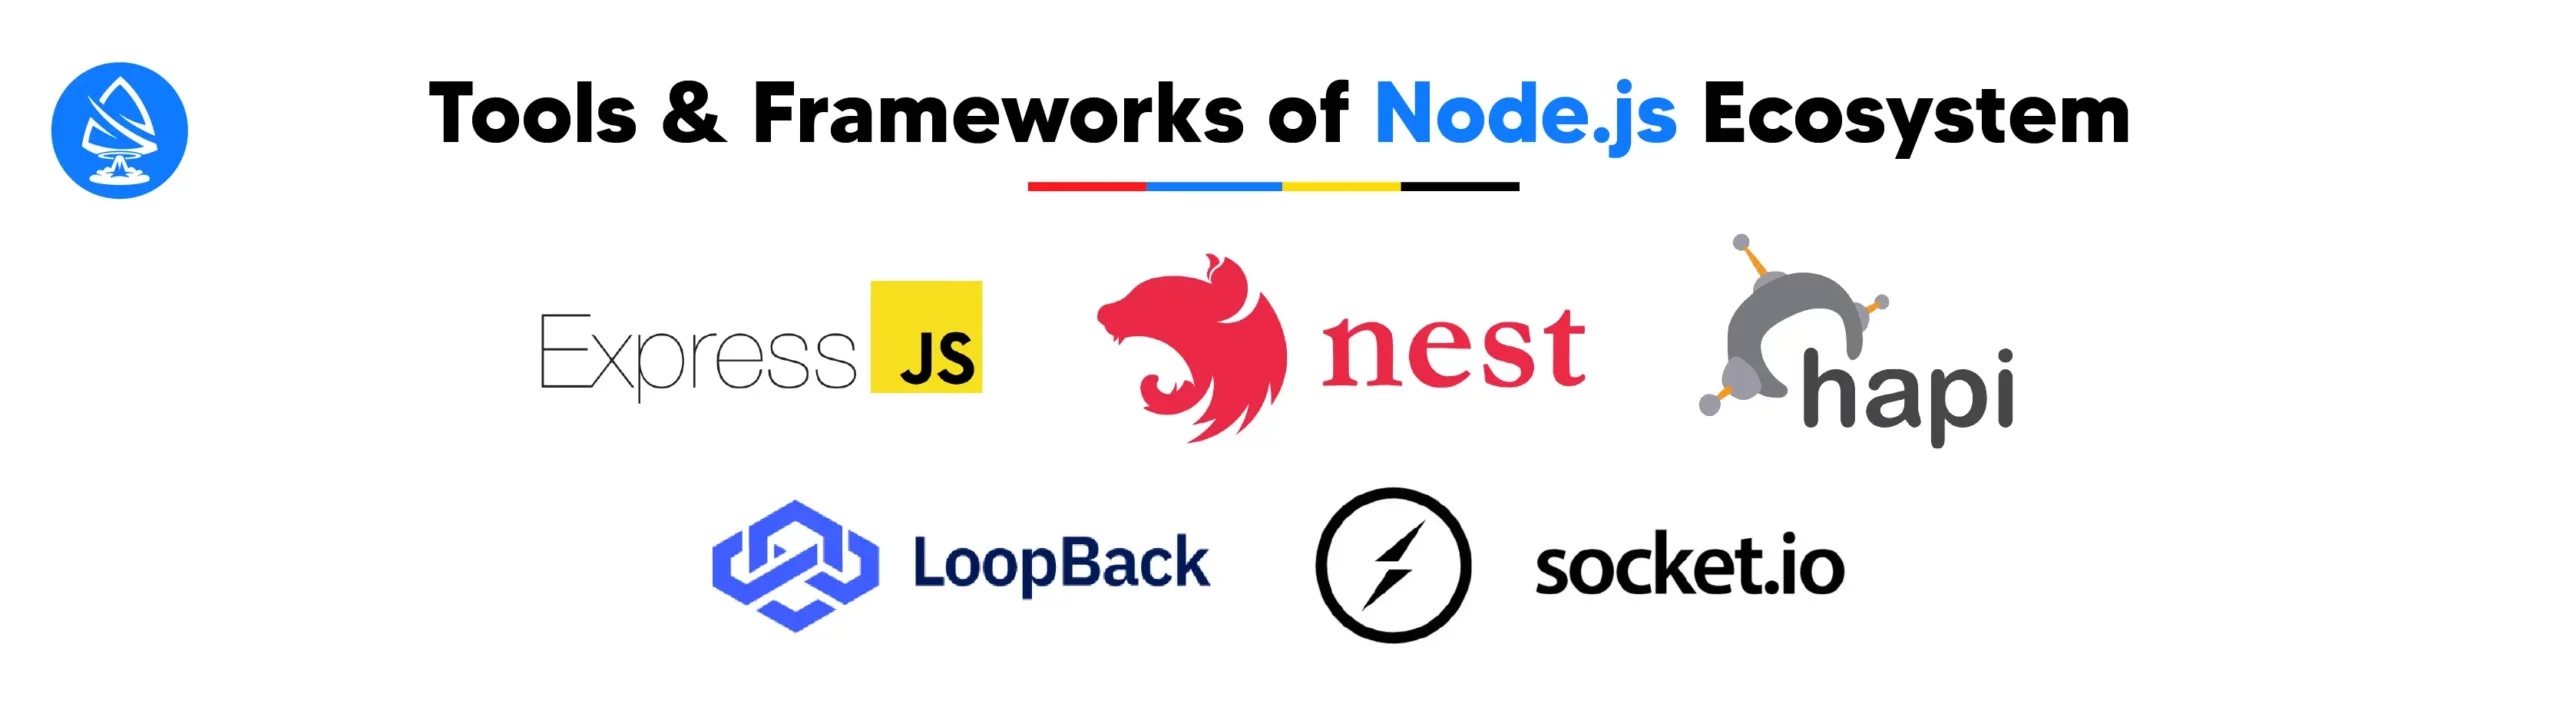 Tools and Frameworks in the Node.js Ecosystem